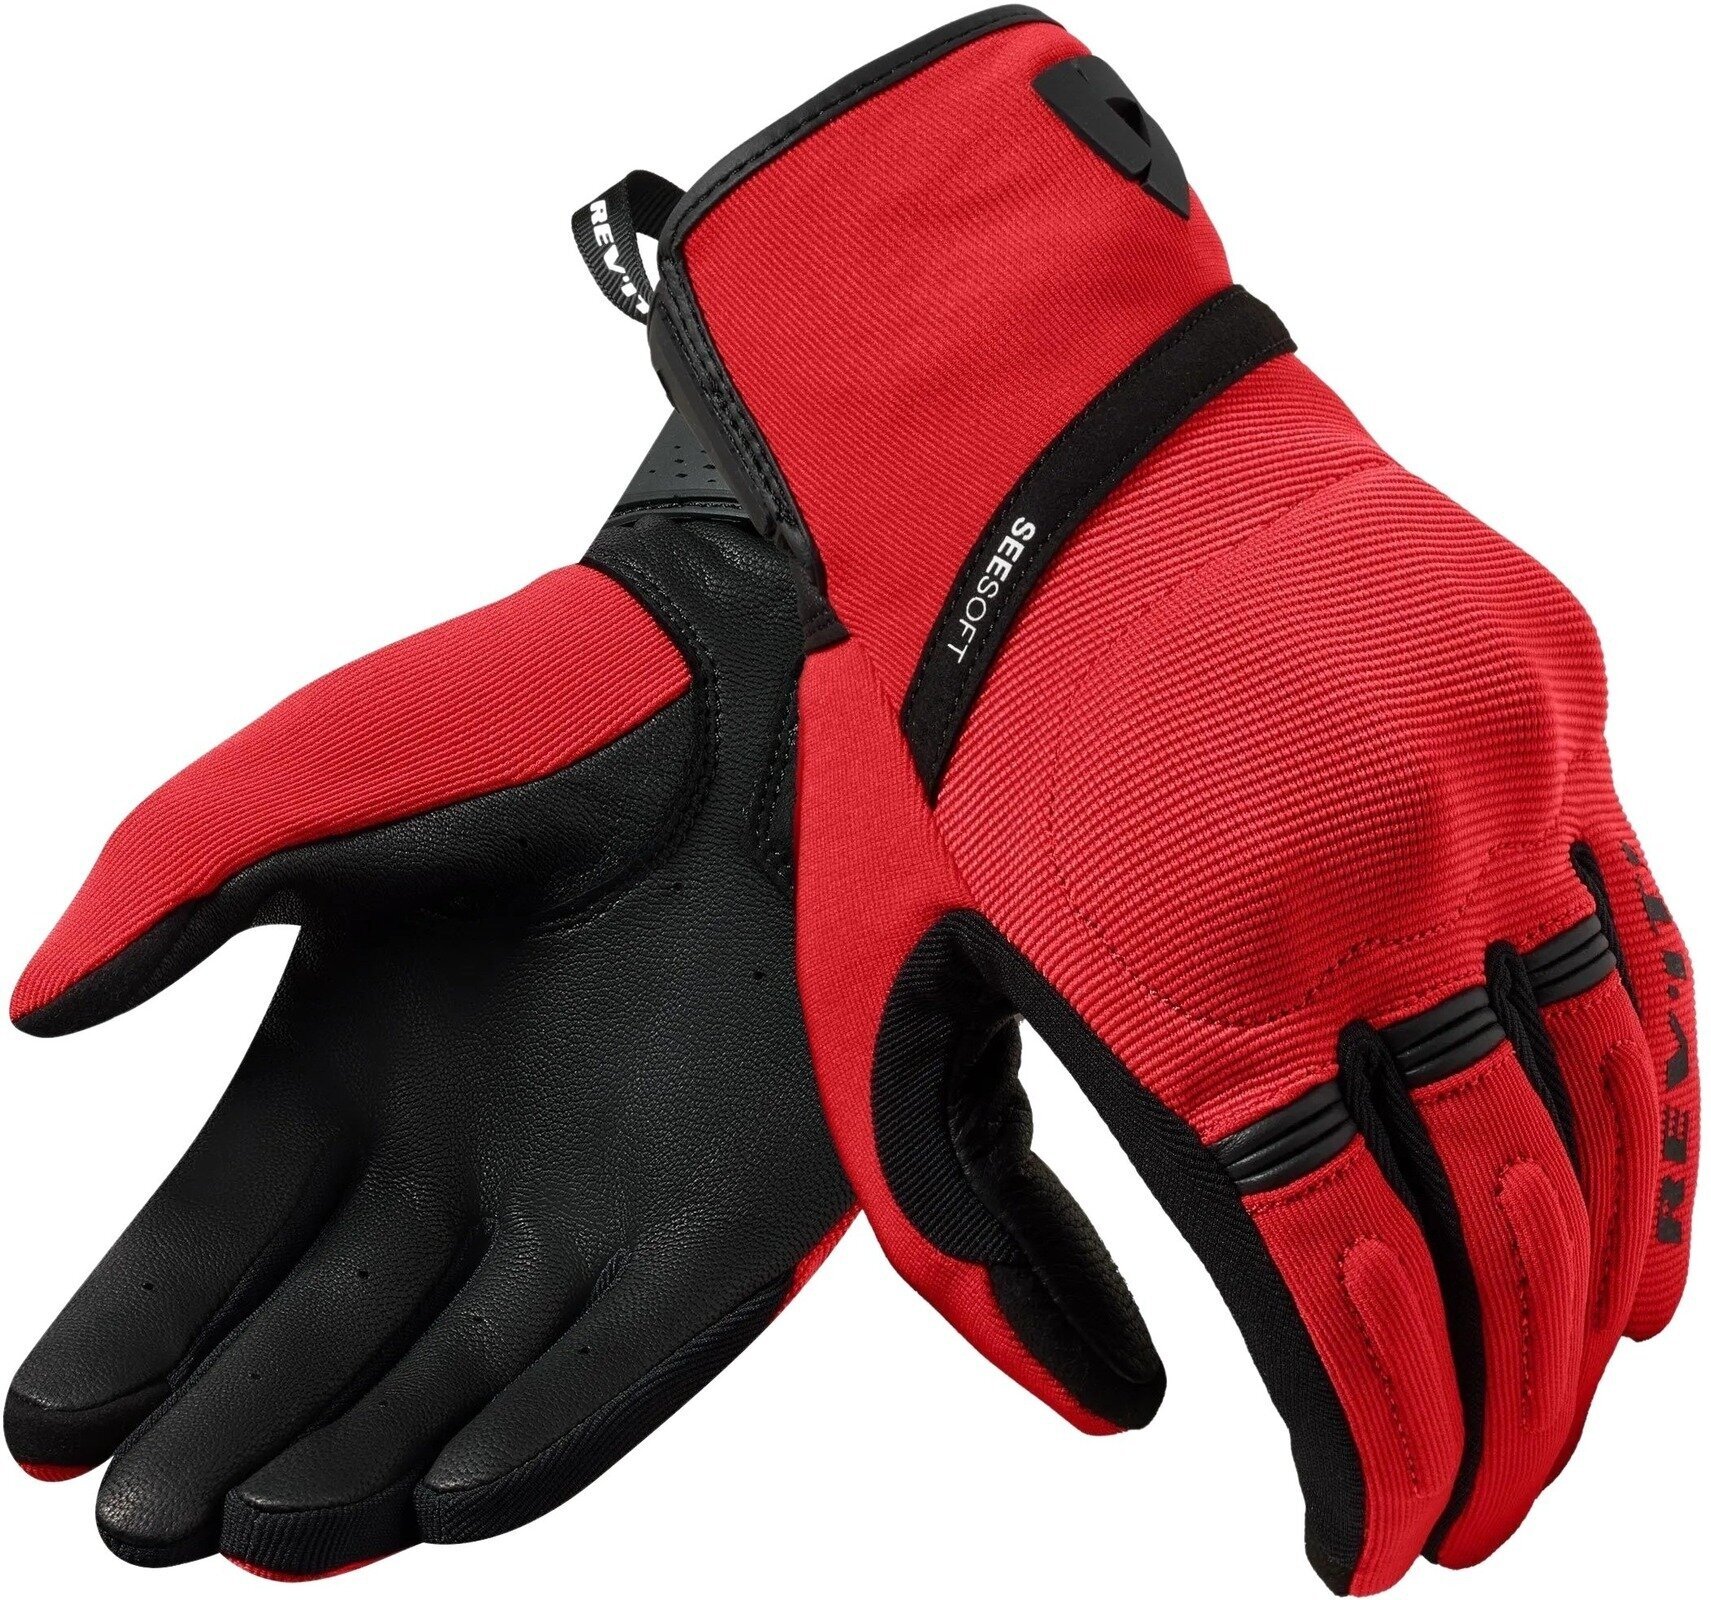 Motorcycle Gloves Rev'it! Gloves Mosca 2 Red/Black 2XL Motorcycle Gloves